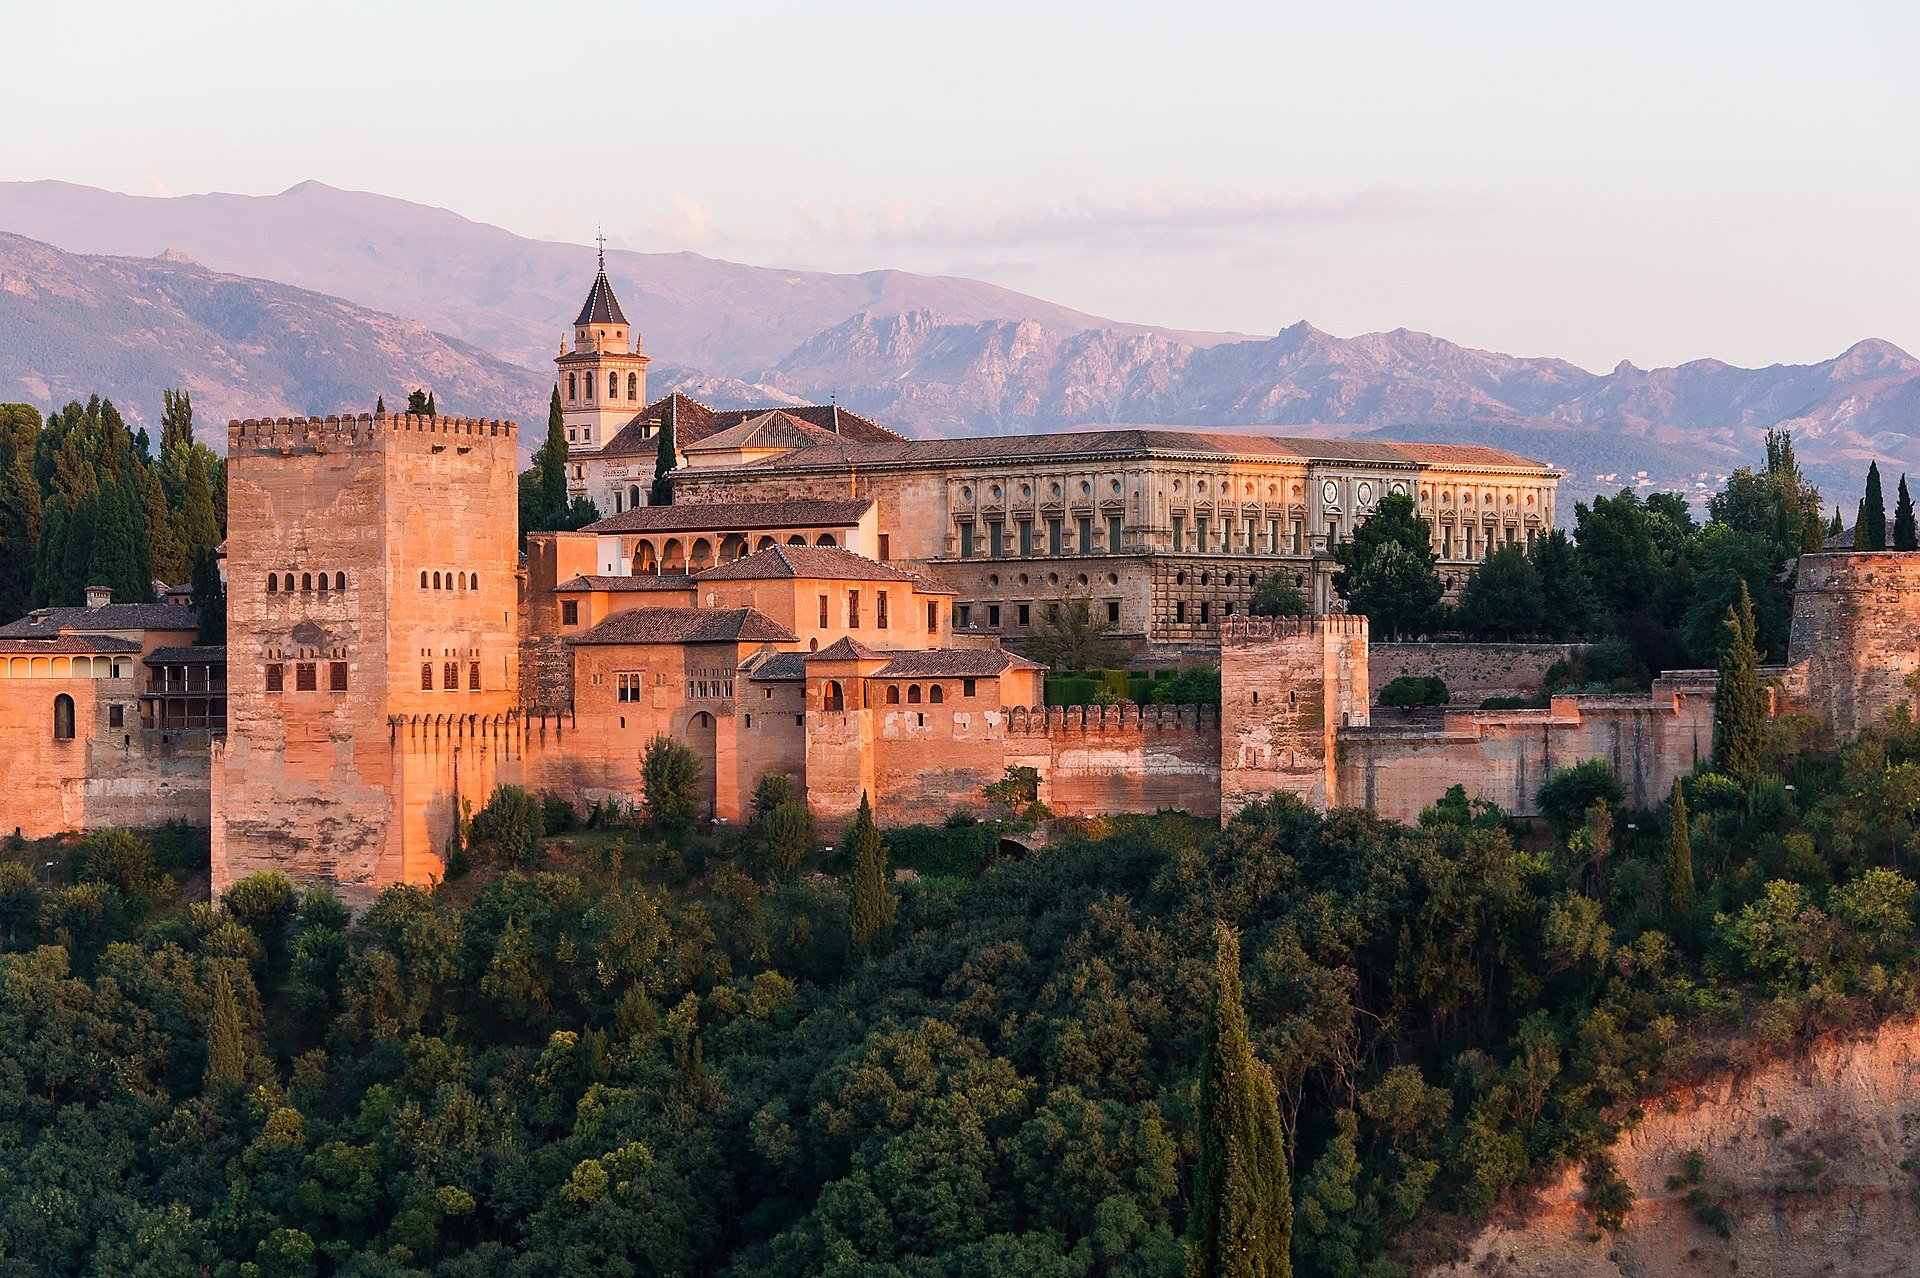 Spain: The Alhambra